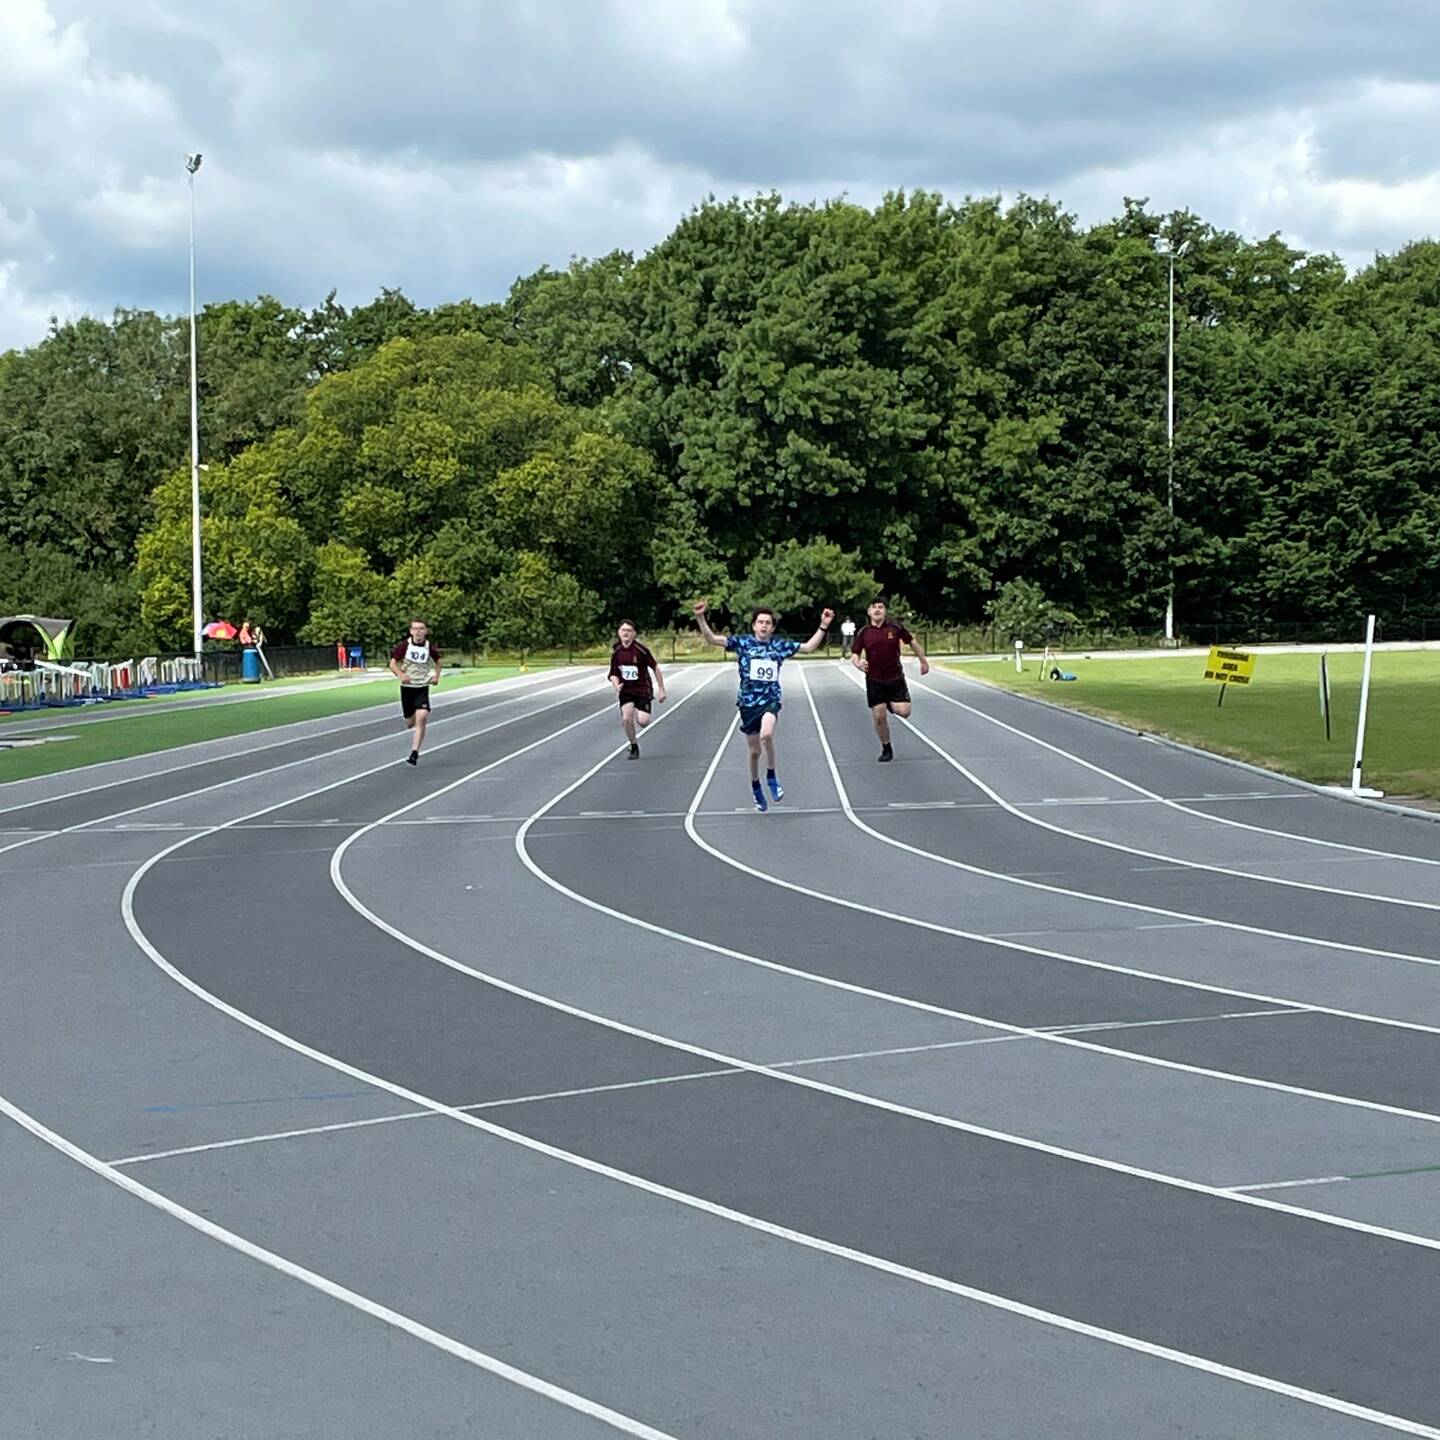 Activity Alliance: Results for the National Junior Athletics